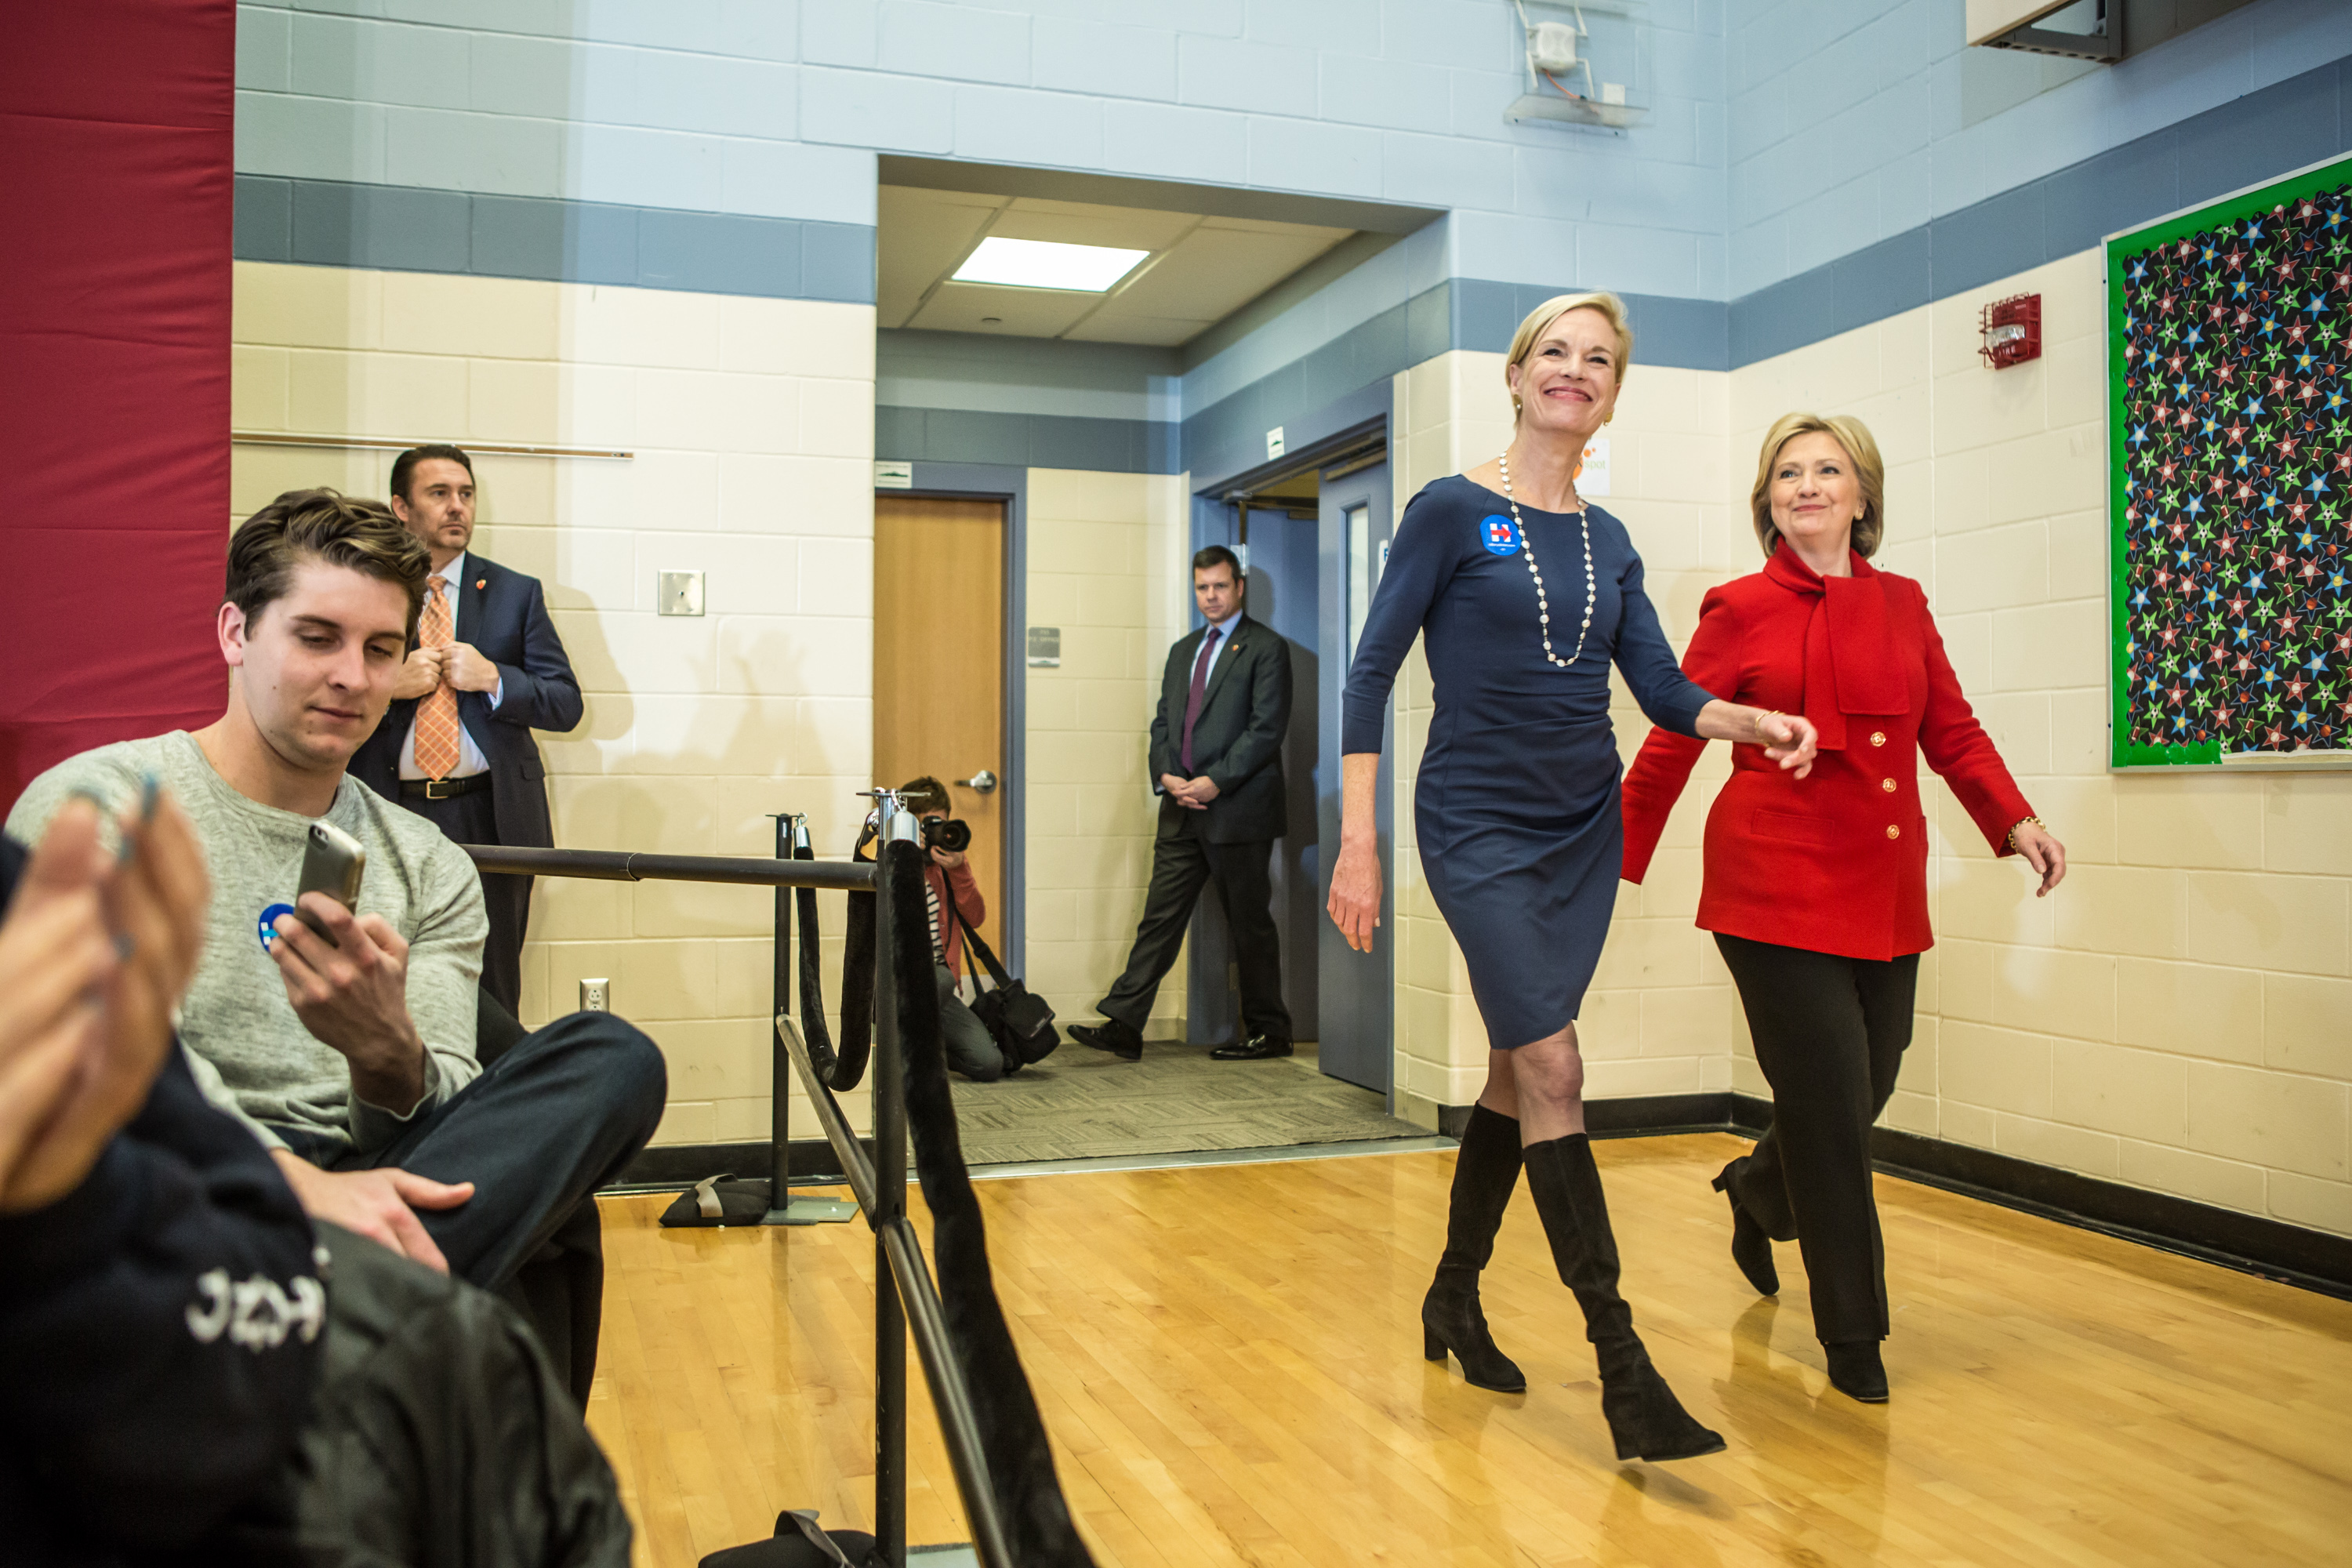 Democratic presidential candidate Hillary Clinton (R) arrives to speak at a campaign event with Cecile Richards (2nd R), president of Planned Parenthood, at Buford Garner Elementary School on January 24, 2016 in North Liberty, Iowa. (Photo by Brendan Hoffman--Getty Images) (Brendan Hoffman&mdash;Getty Images)